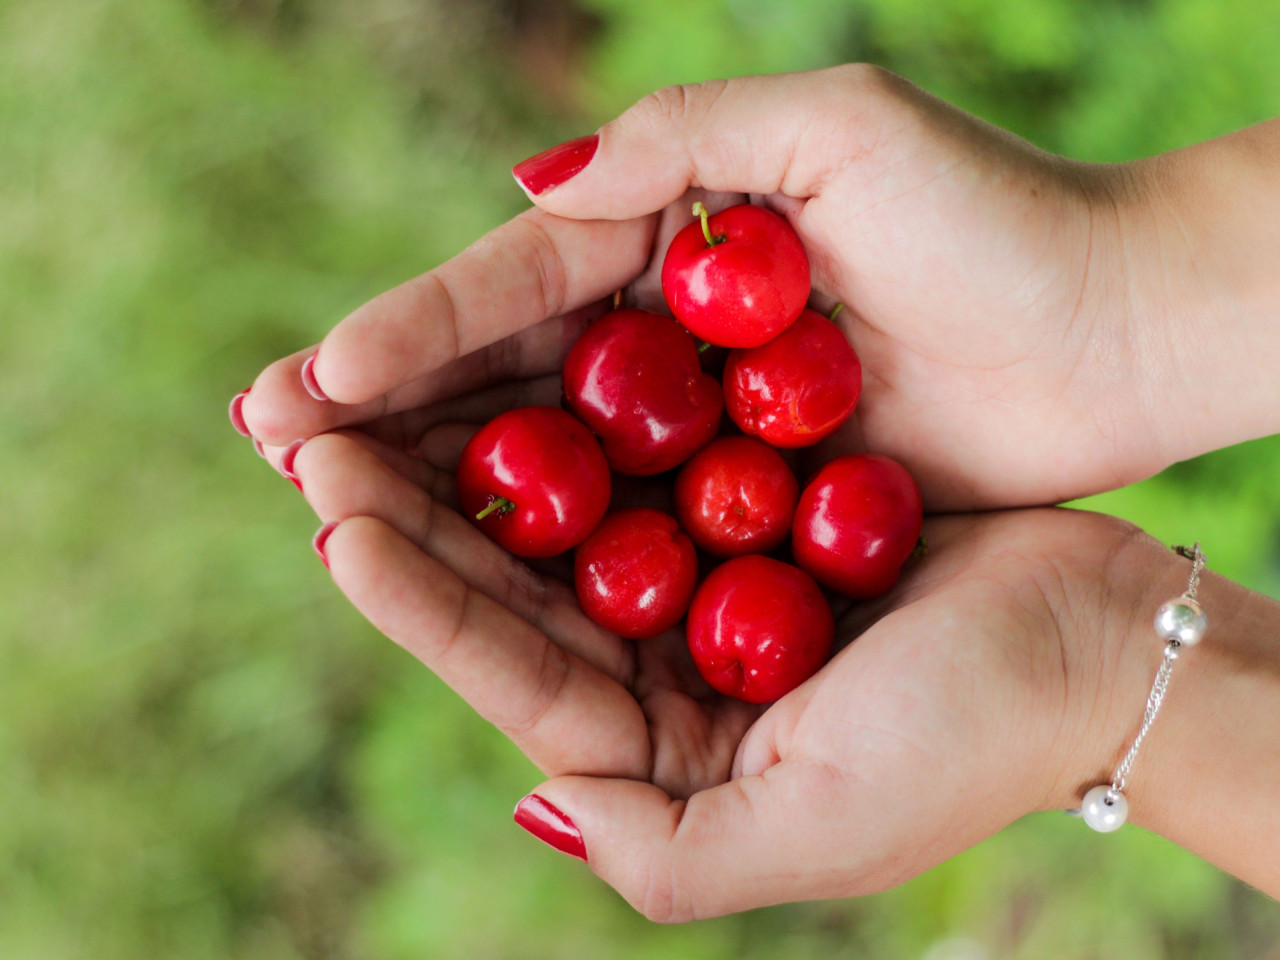 Hands filled with cherries wallpaper 1280x960